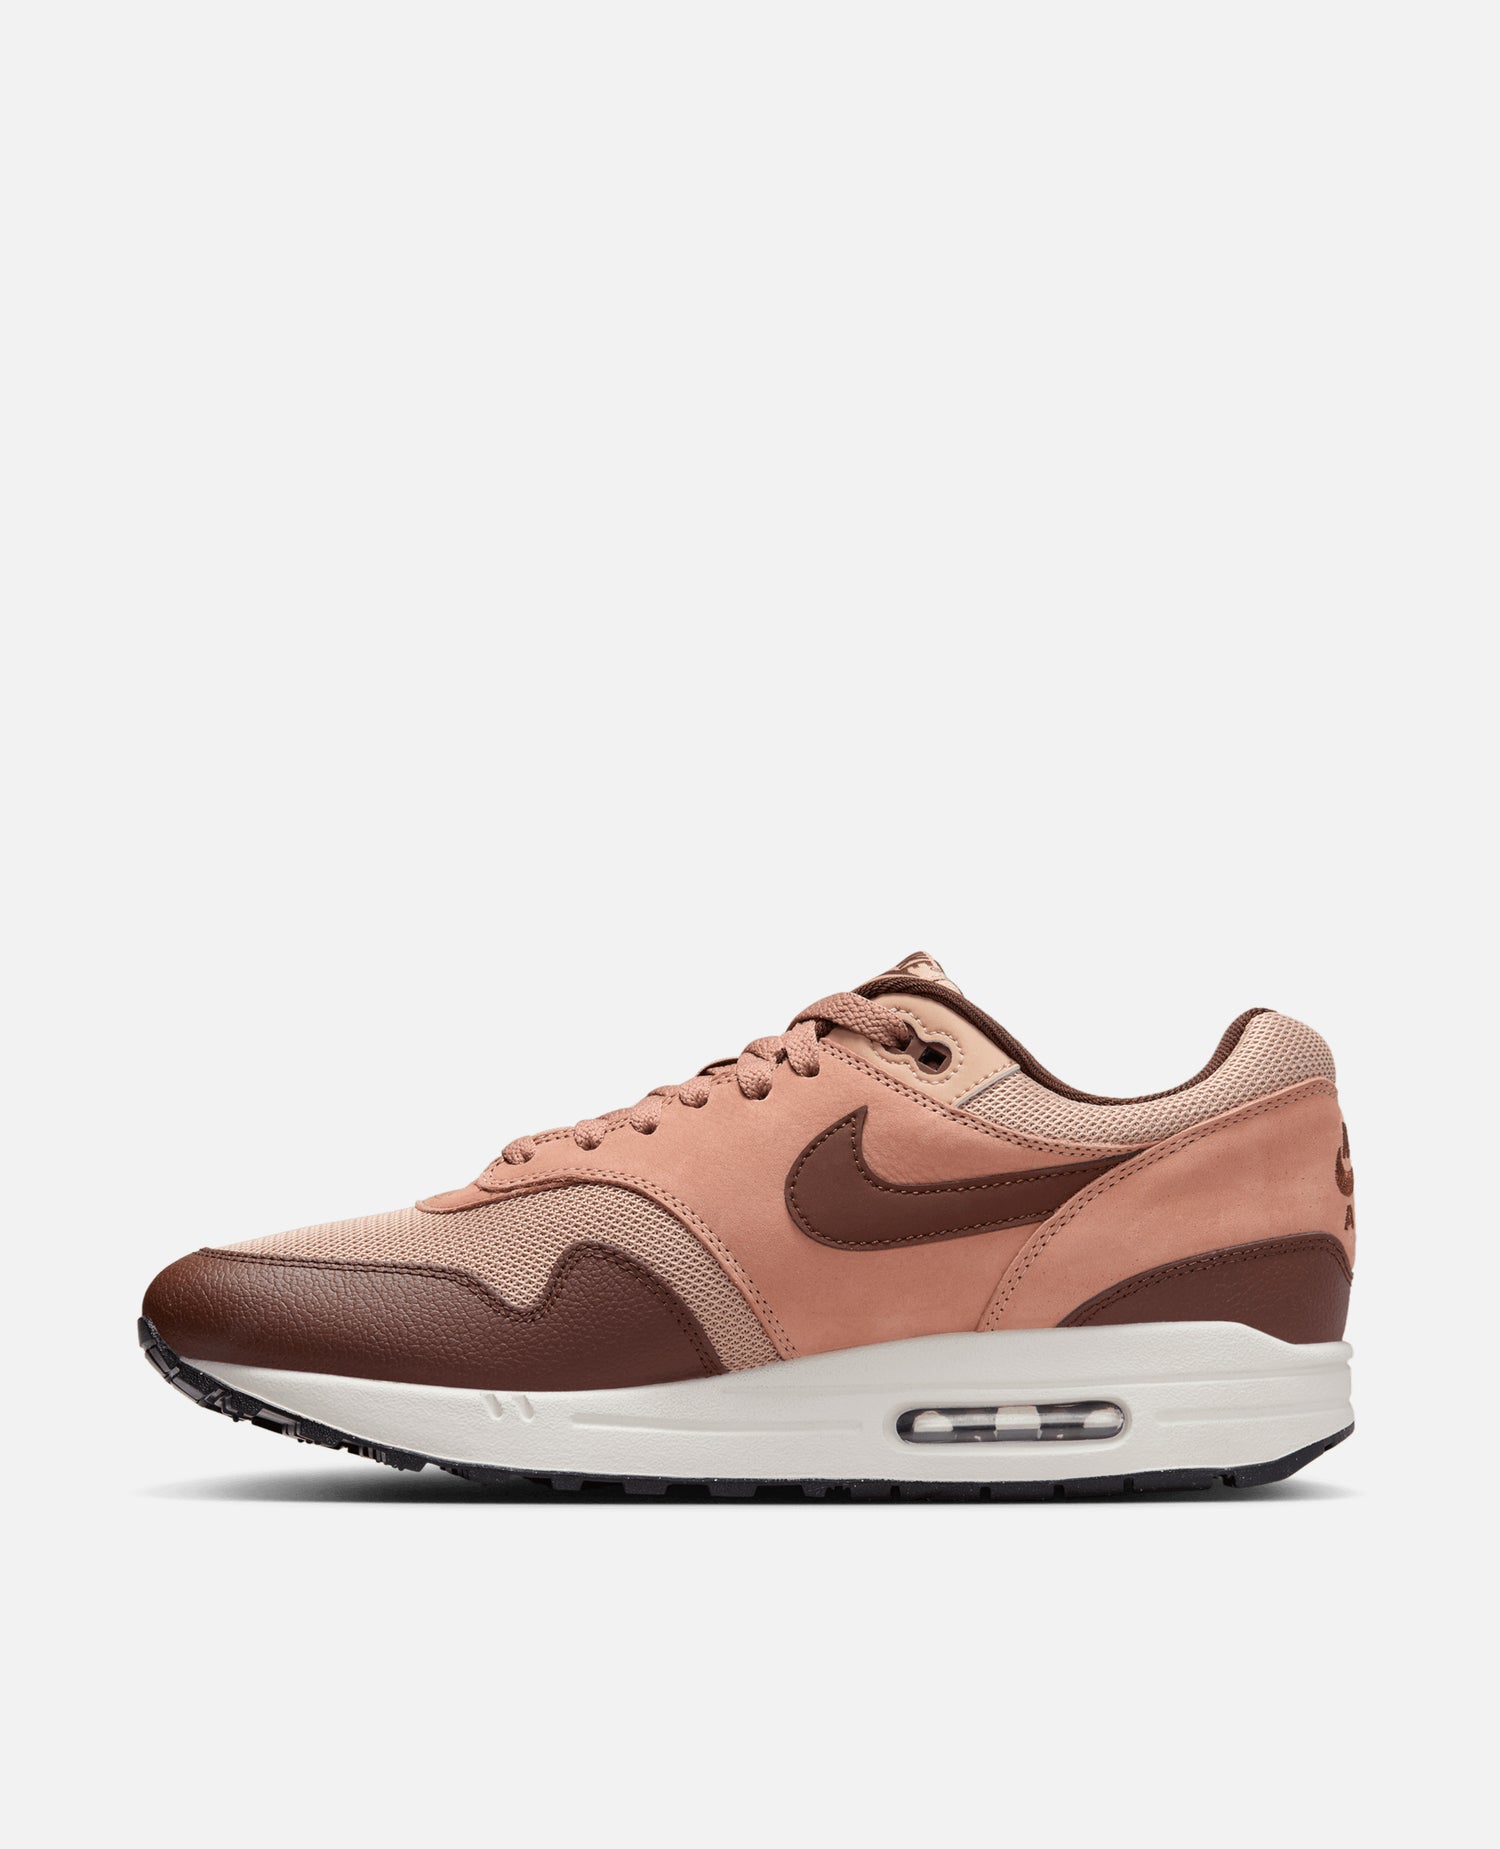 Nike Air Max 1 Sc (Chanvre/Cacao Wow-Dusted Clay)